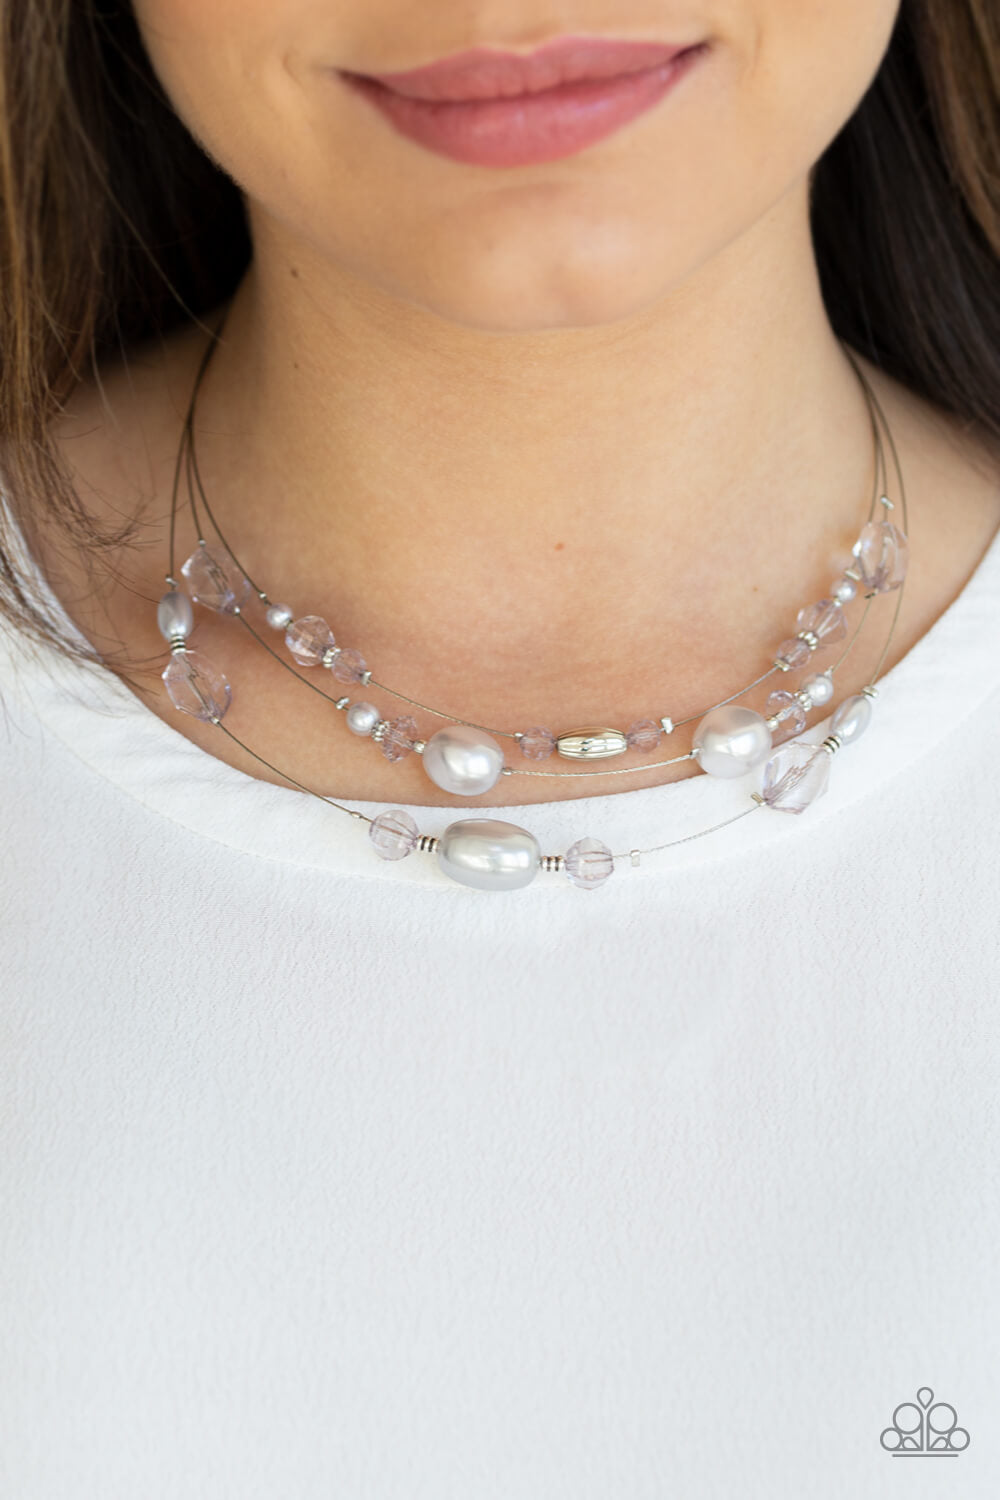 Pacific Pageantry - Silver Necklace Set - Princess Glam Shop